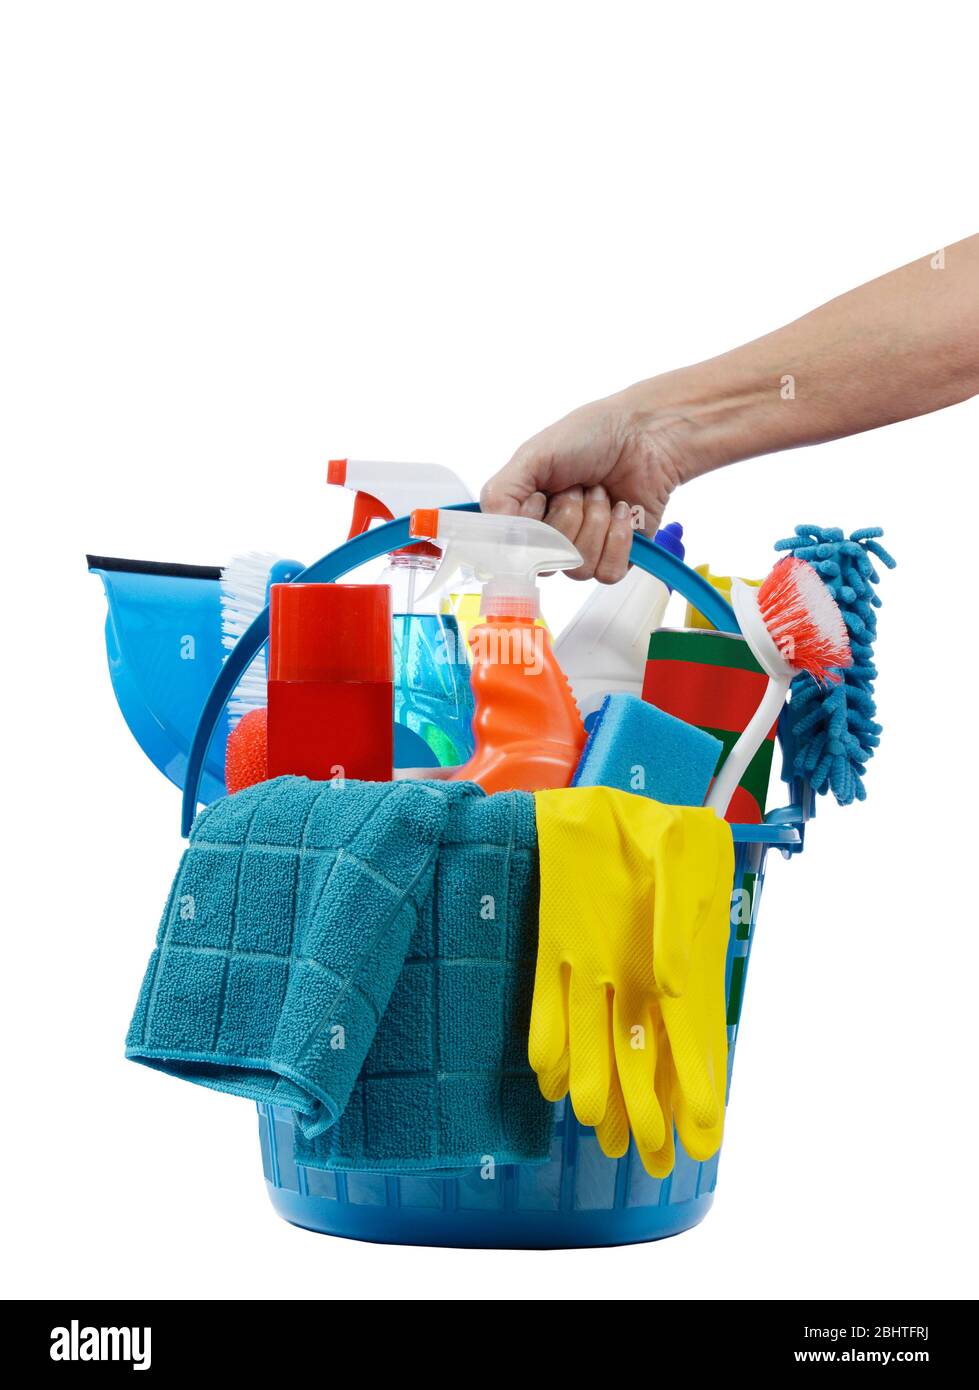 Vertical shot of a female hand holding a round blue plastic basket of cleaning supplies. White background. Stock Photo